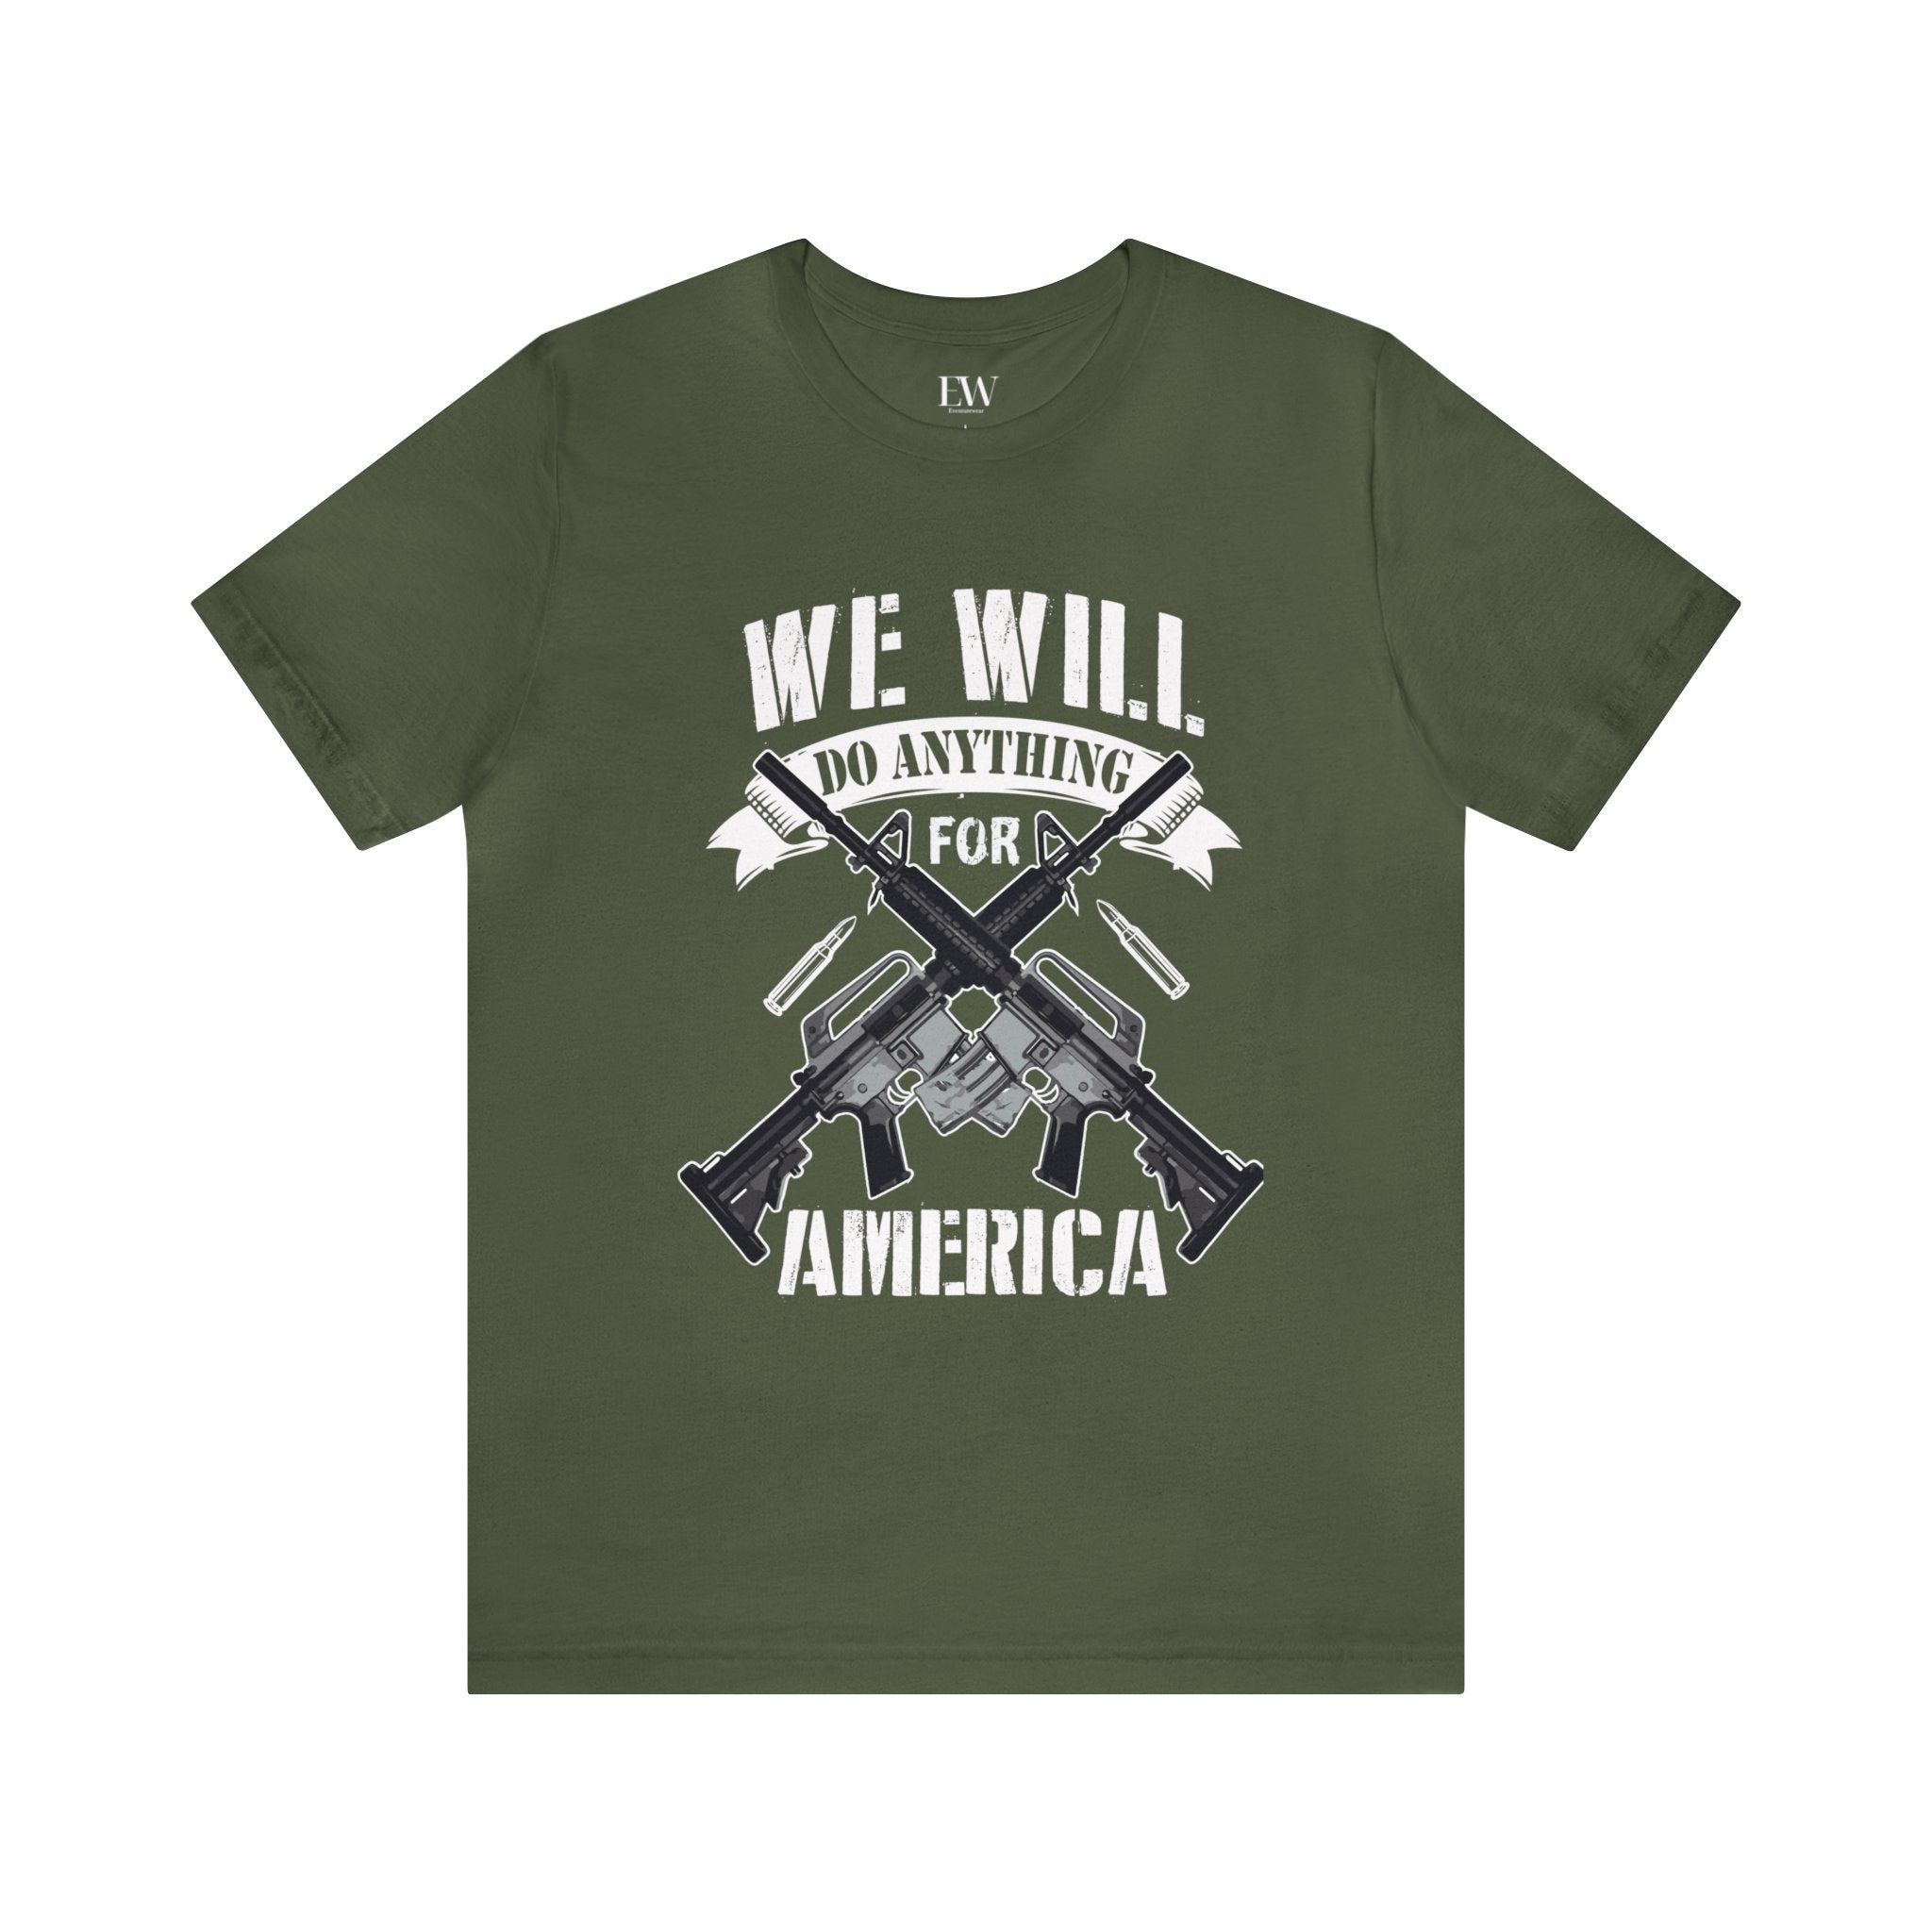 Anything For America Patriotic Shirt